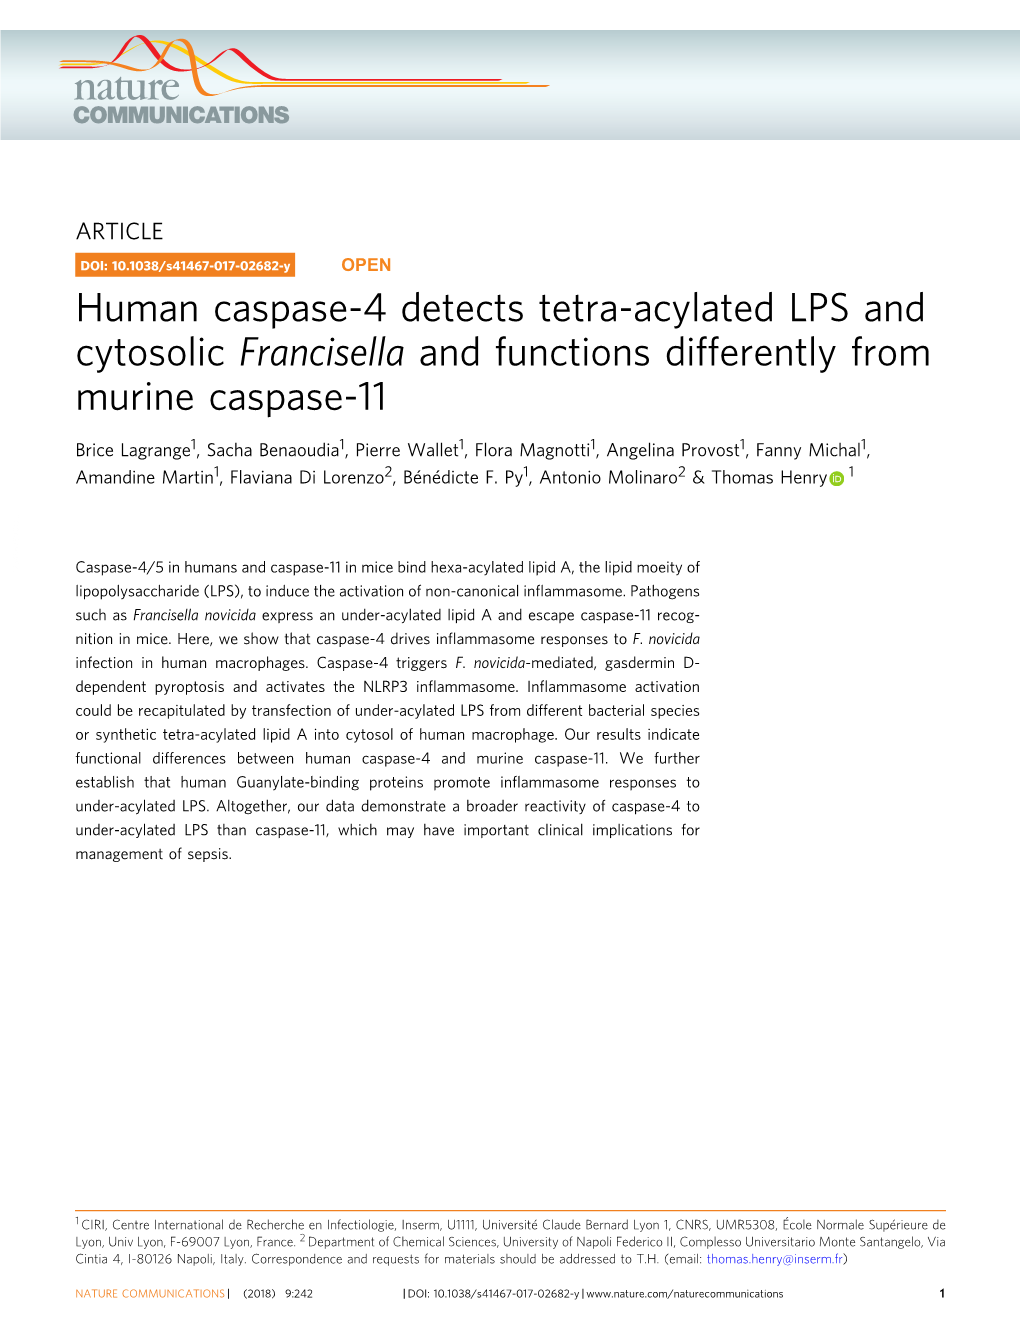 Human Caspase-4 Detects Tetra-Acylated LPS and Cytosolic Francisella and Functions Differently from Murine Caspase-11